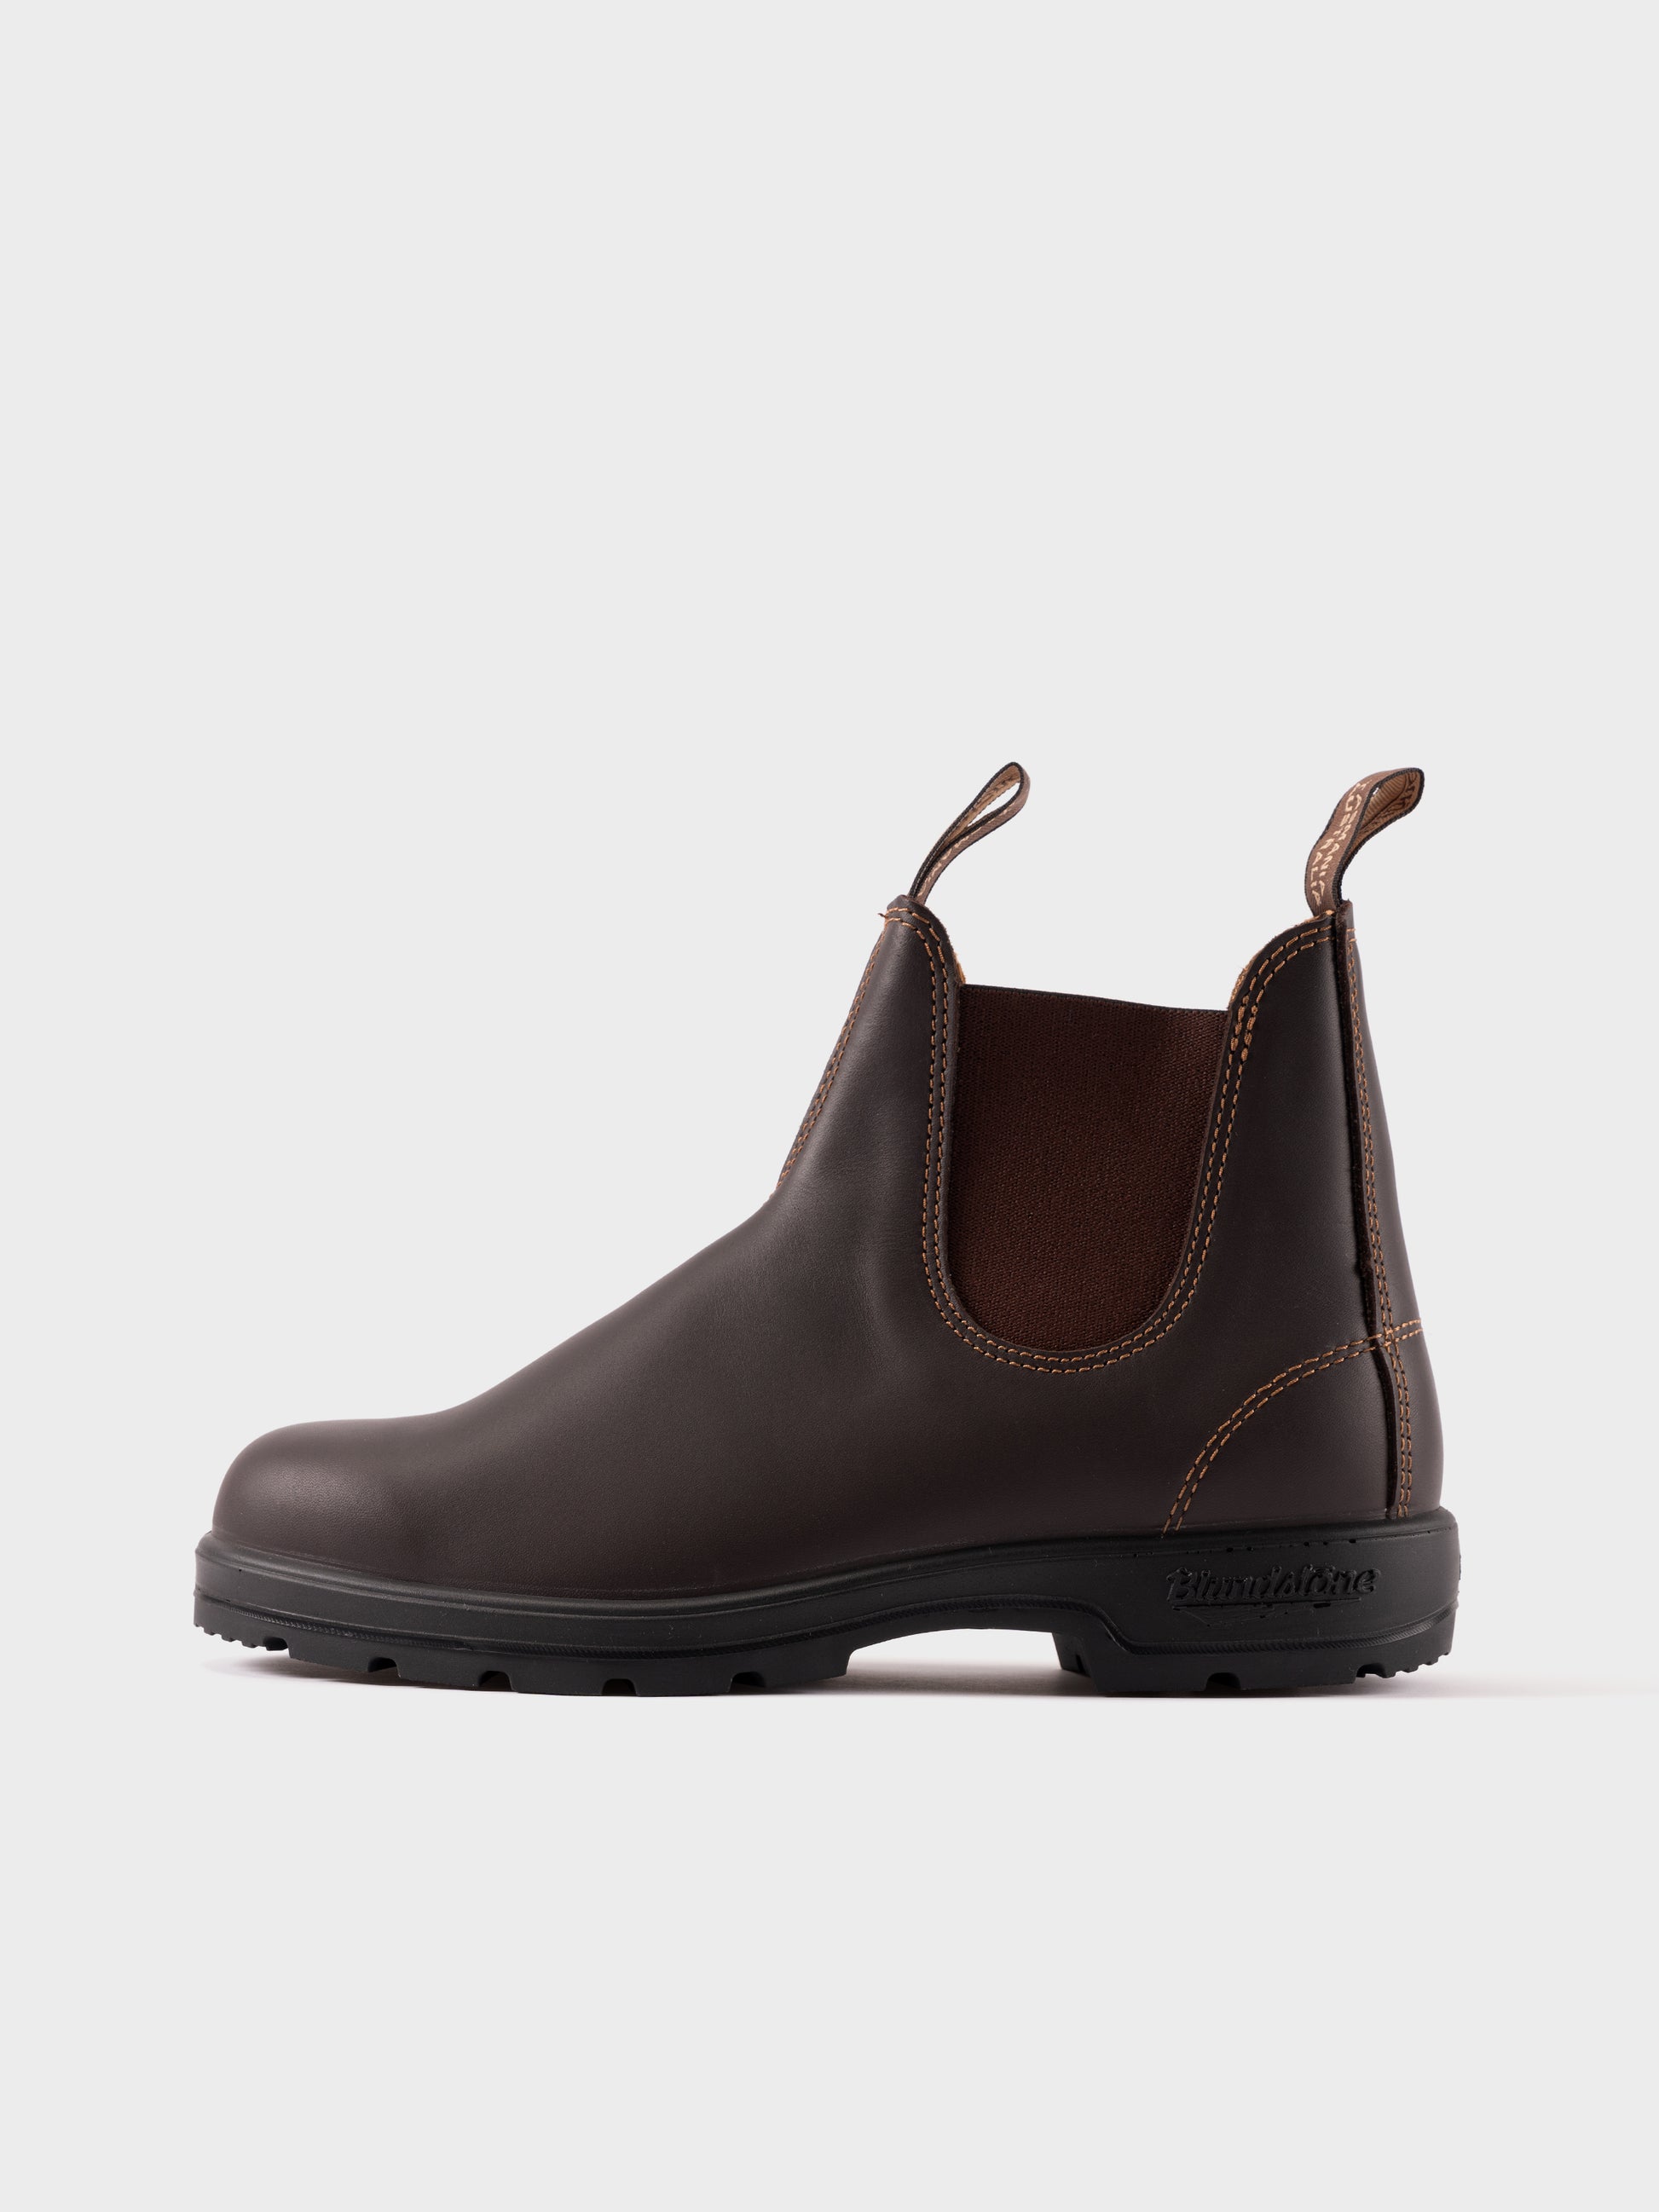 Blundstone Boots - 550 - Walnut Brown Leather